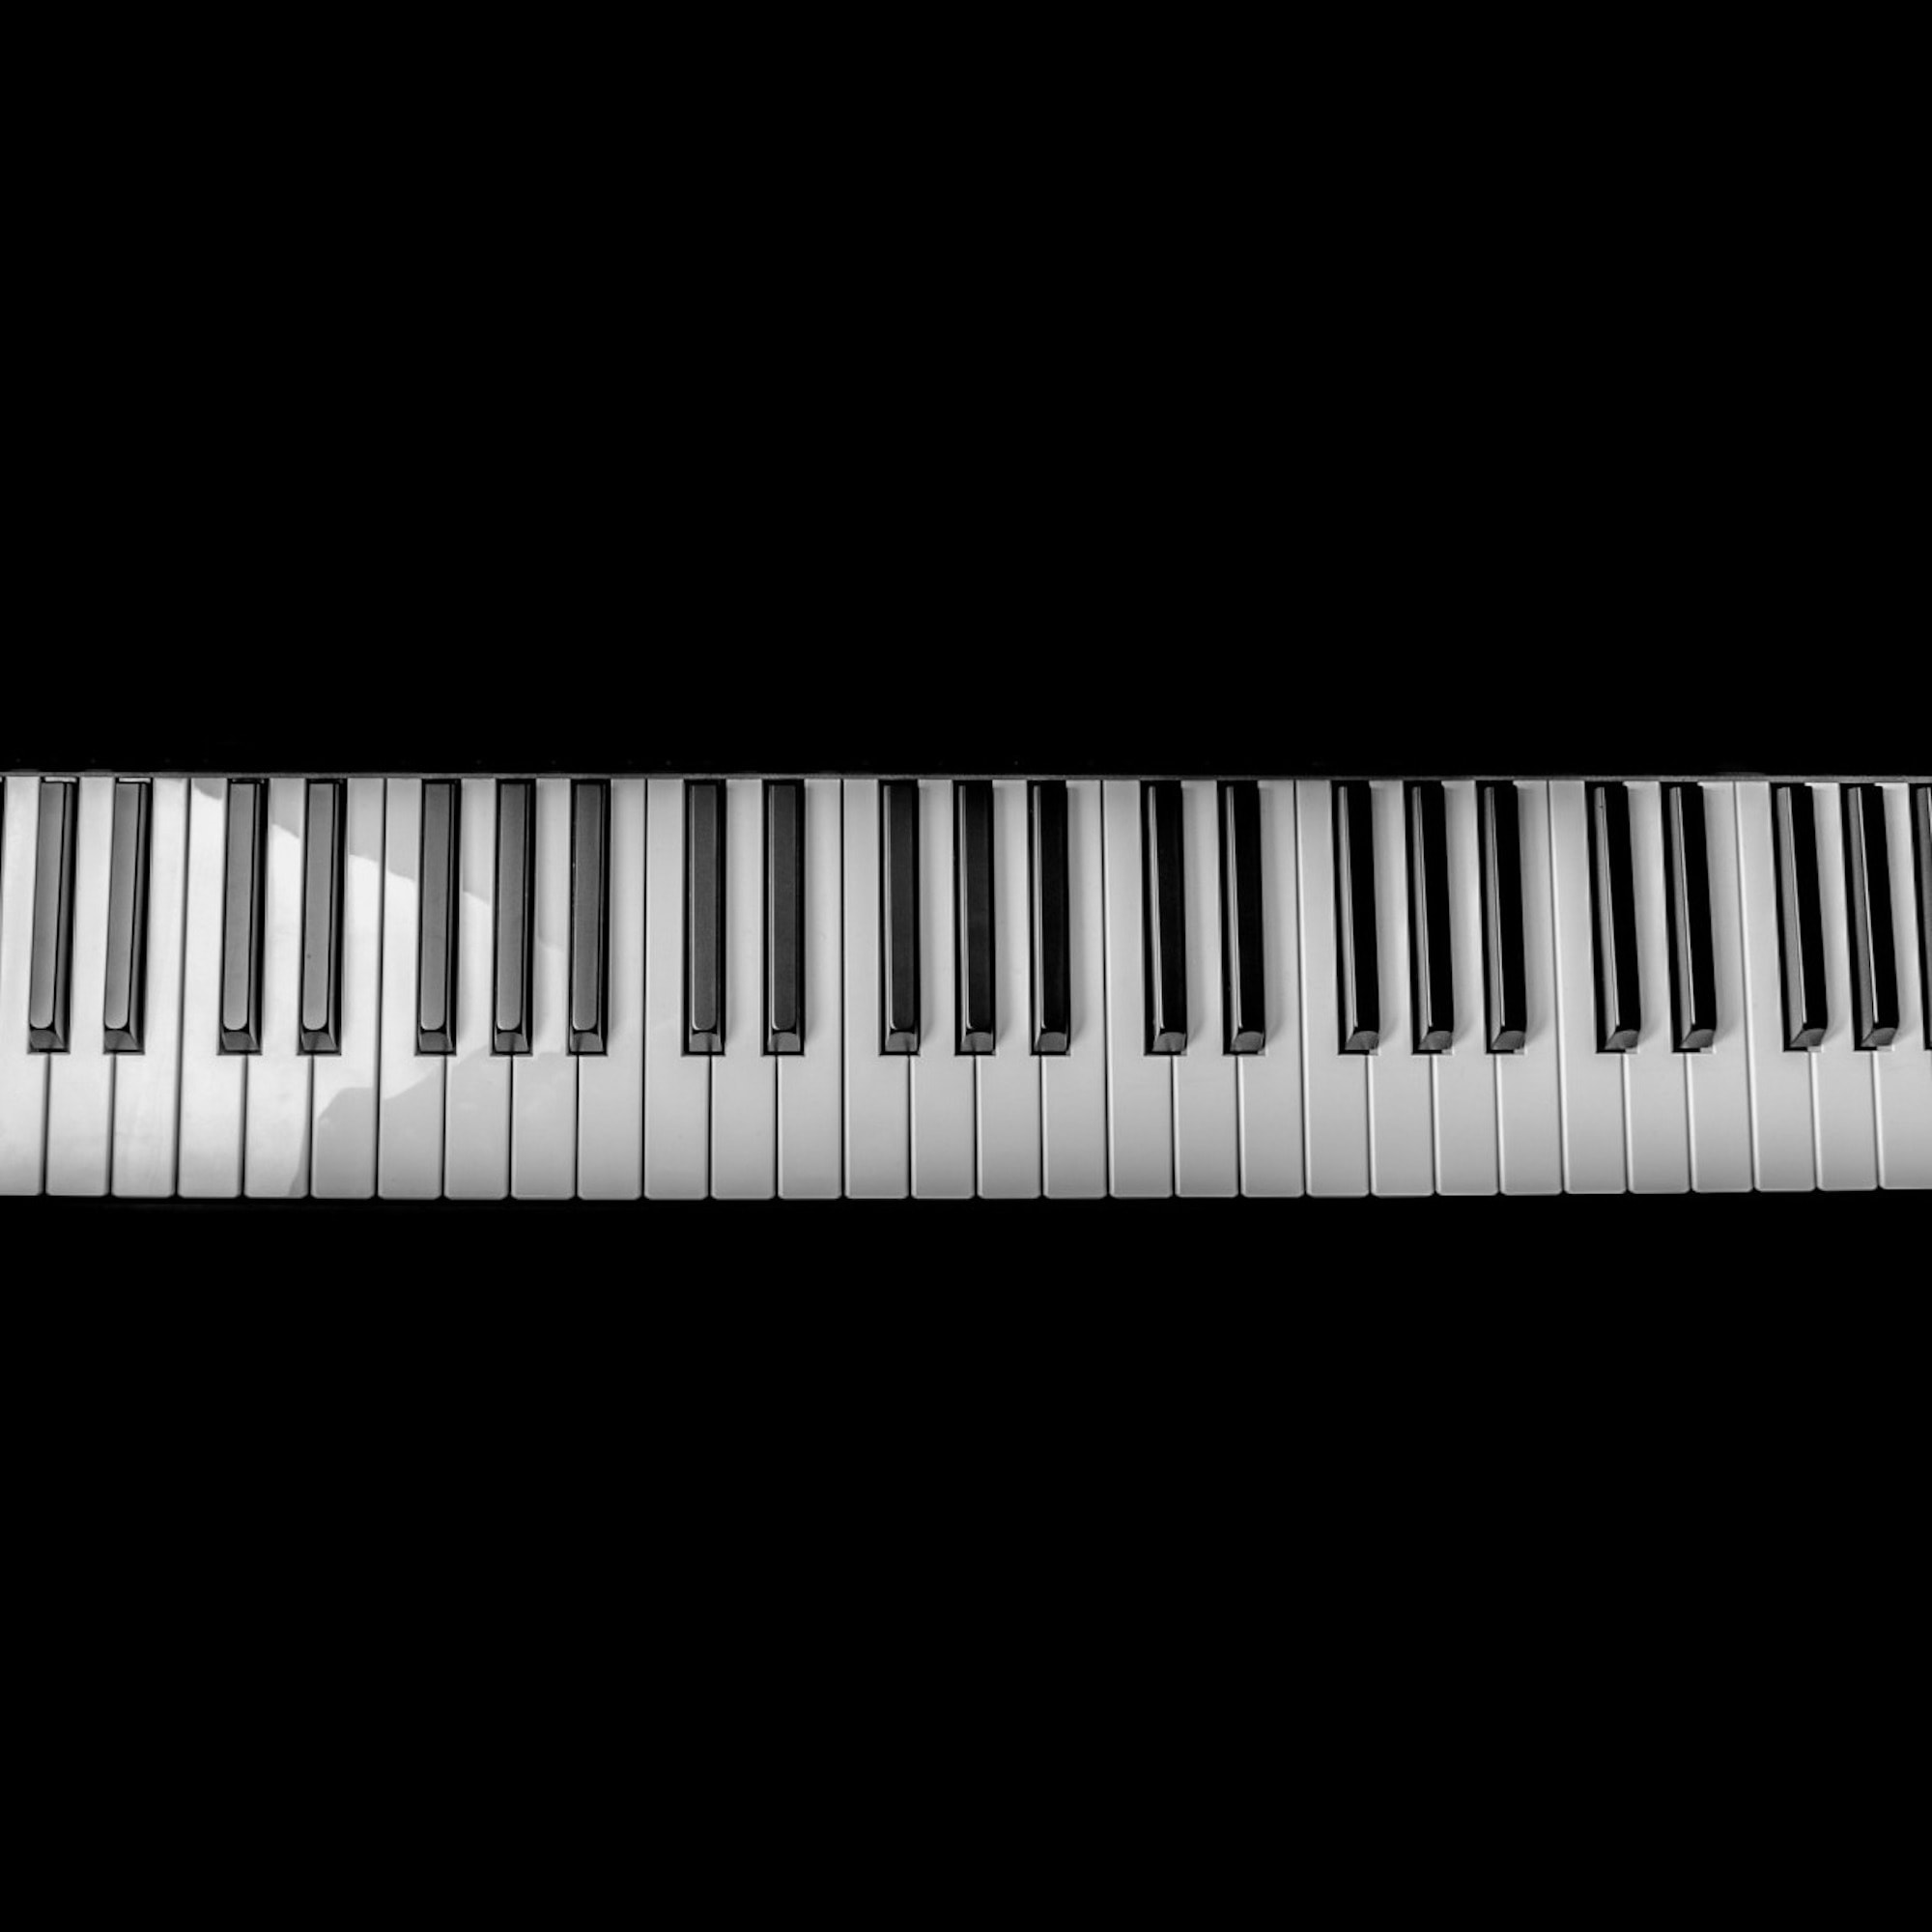 30 Intimate Melodies - Piano Edition